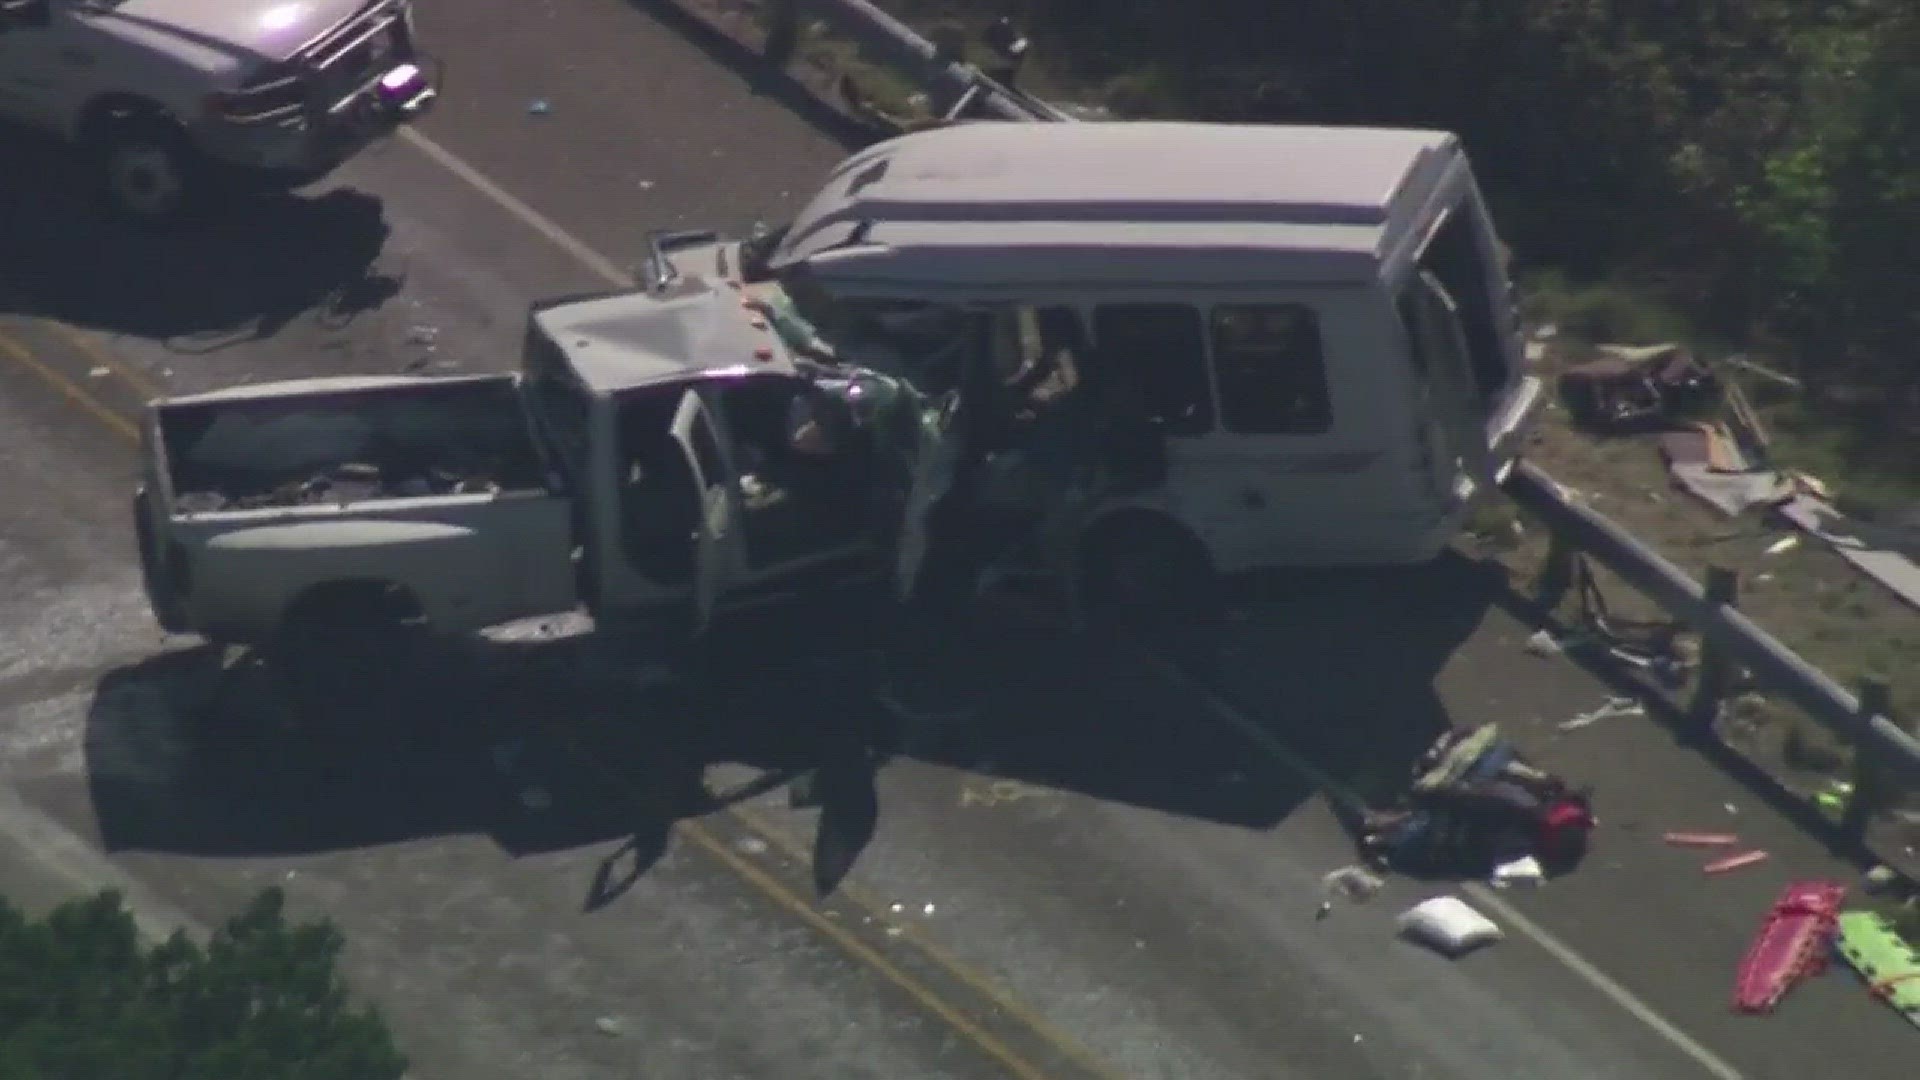 TxDOT: Truck driver in fatal church bus crash on pills, texting before accident